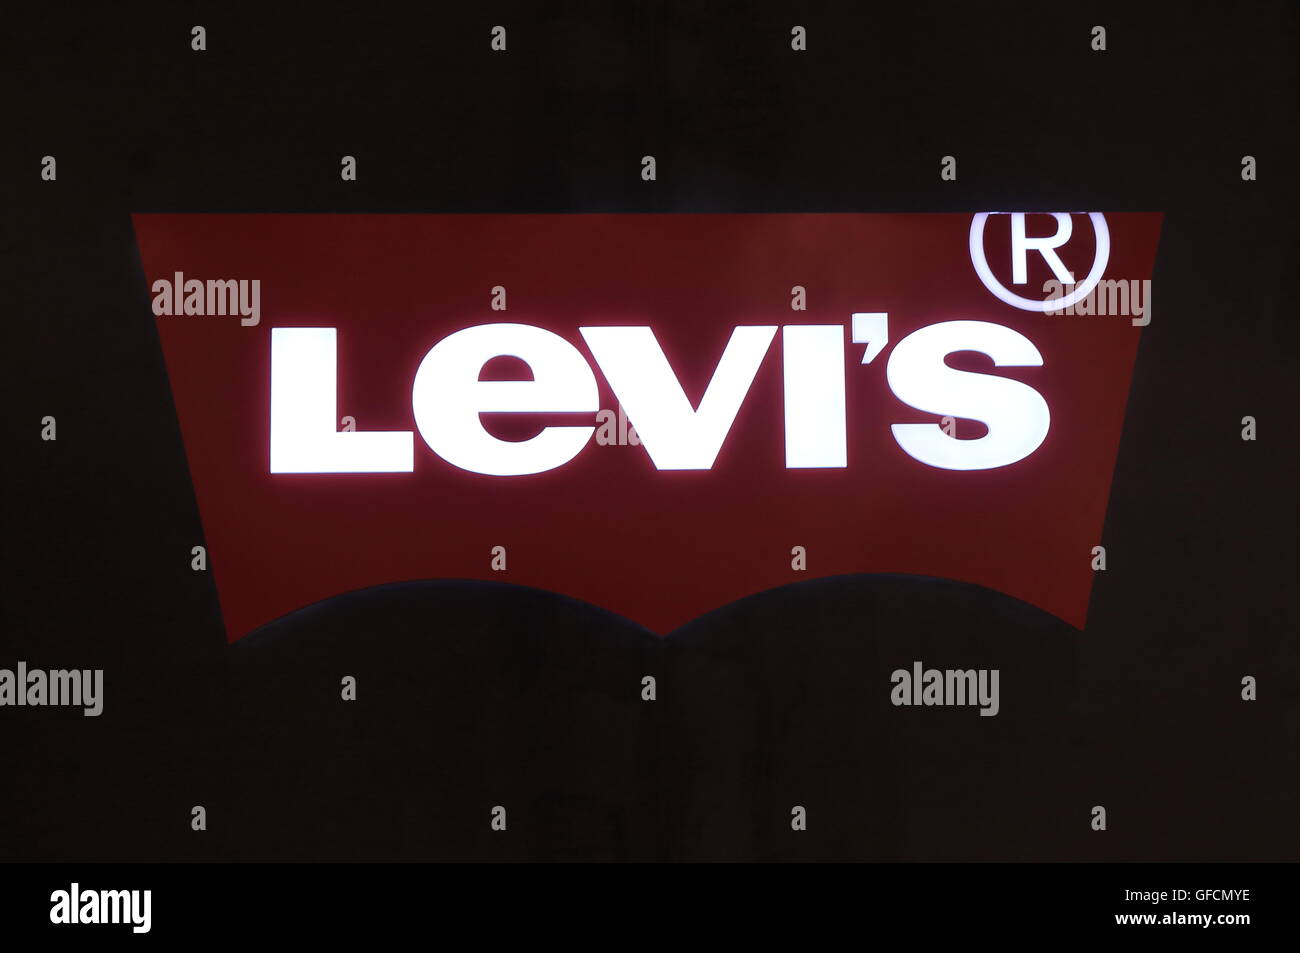 Levis Logo High Resolution Stock Photography and Images - Alamy